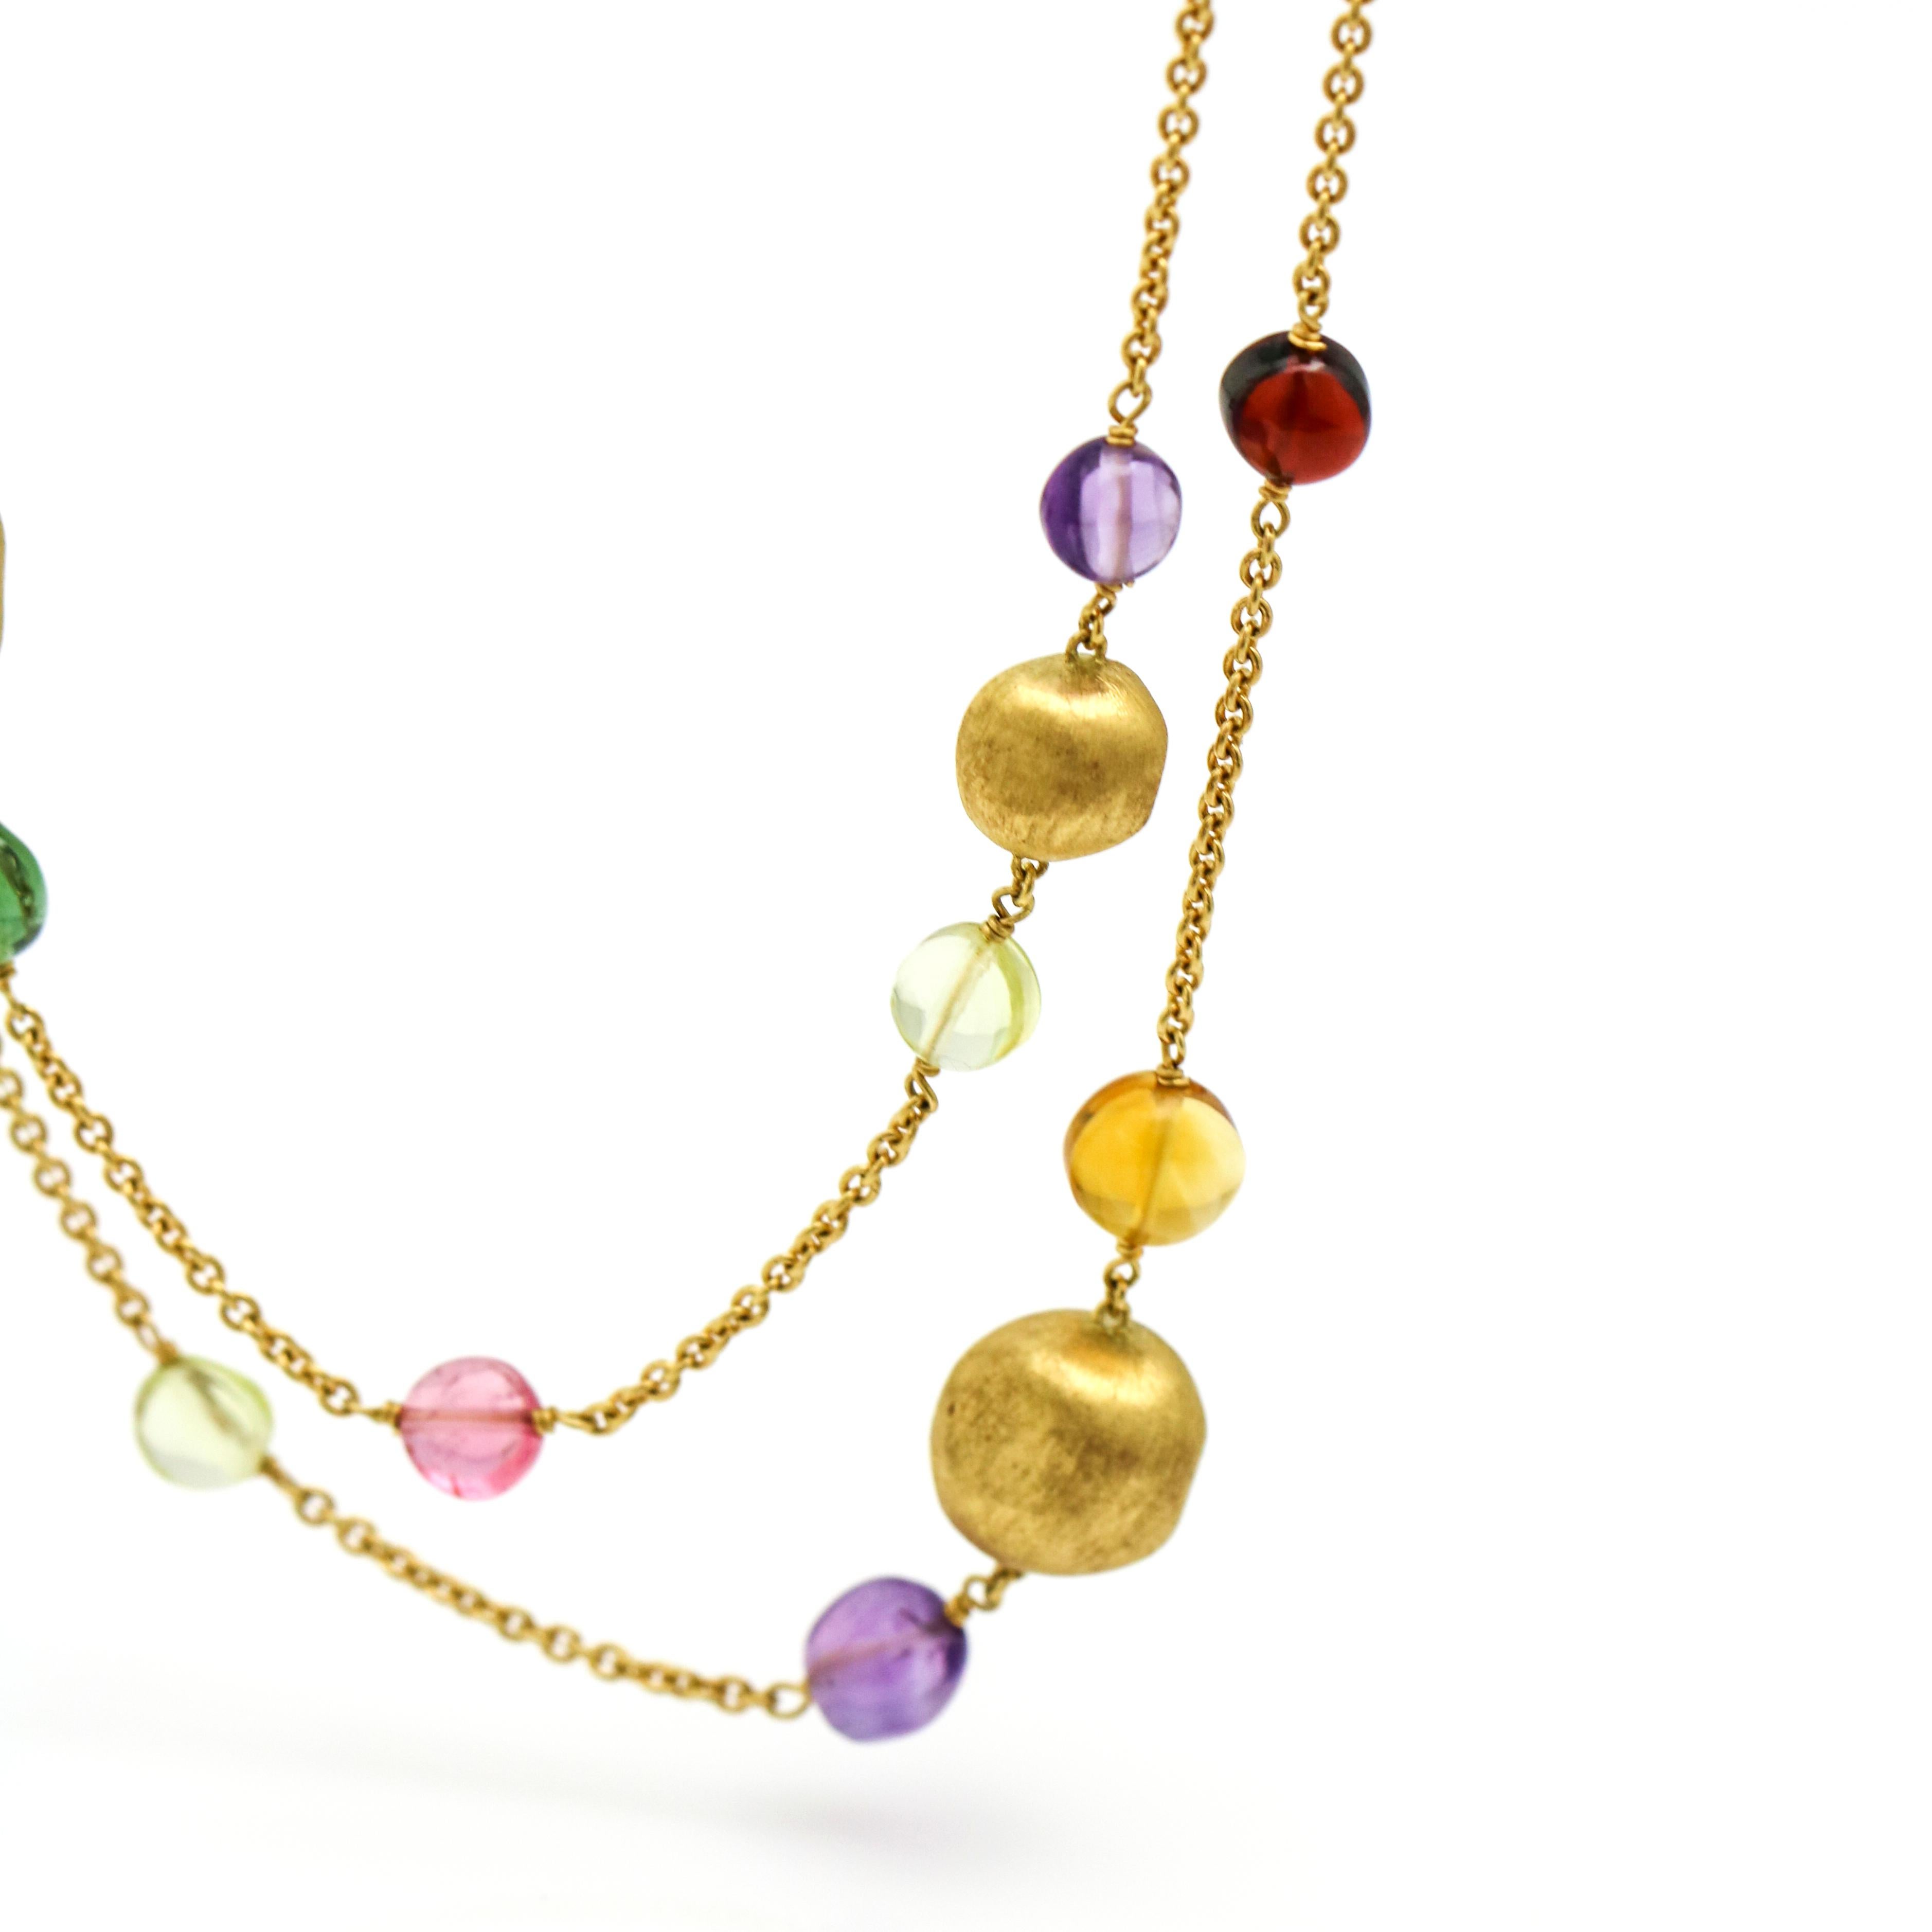 Round Cut Marco Bicego 18K Yellow Gold and Multi-Colored Gemstone Long Statement Necklace